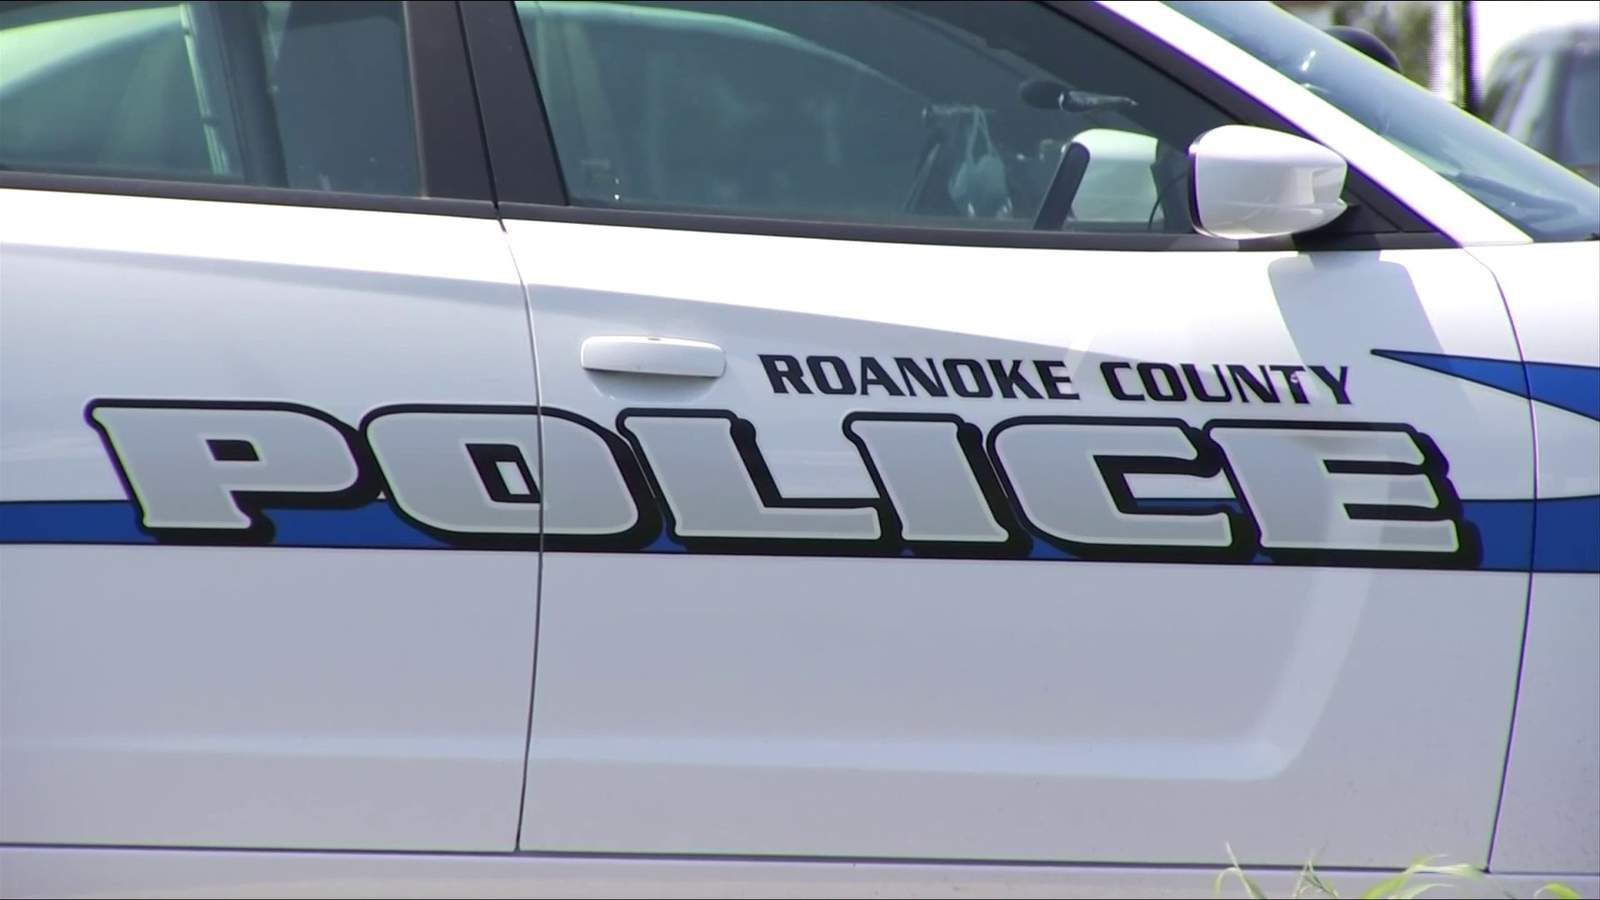 Roanoke County leaders consider raising officer pay after losing nearly 20% of department this year